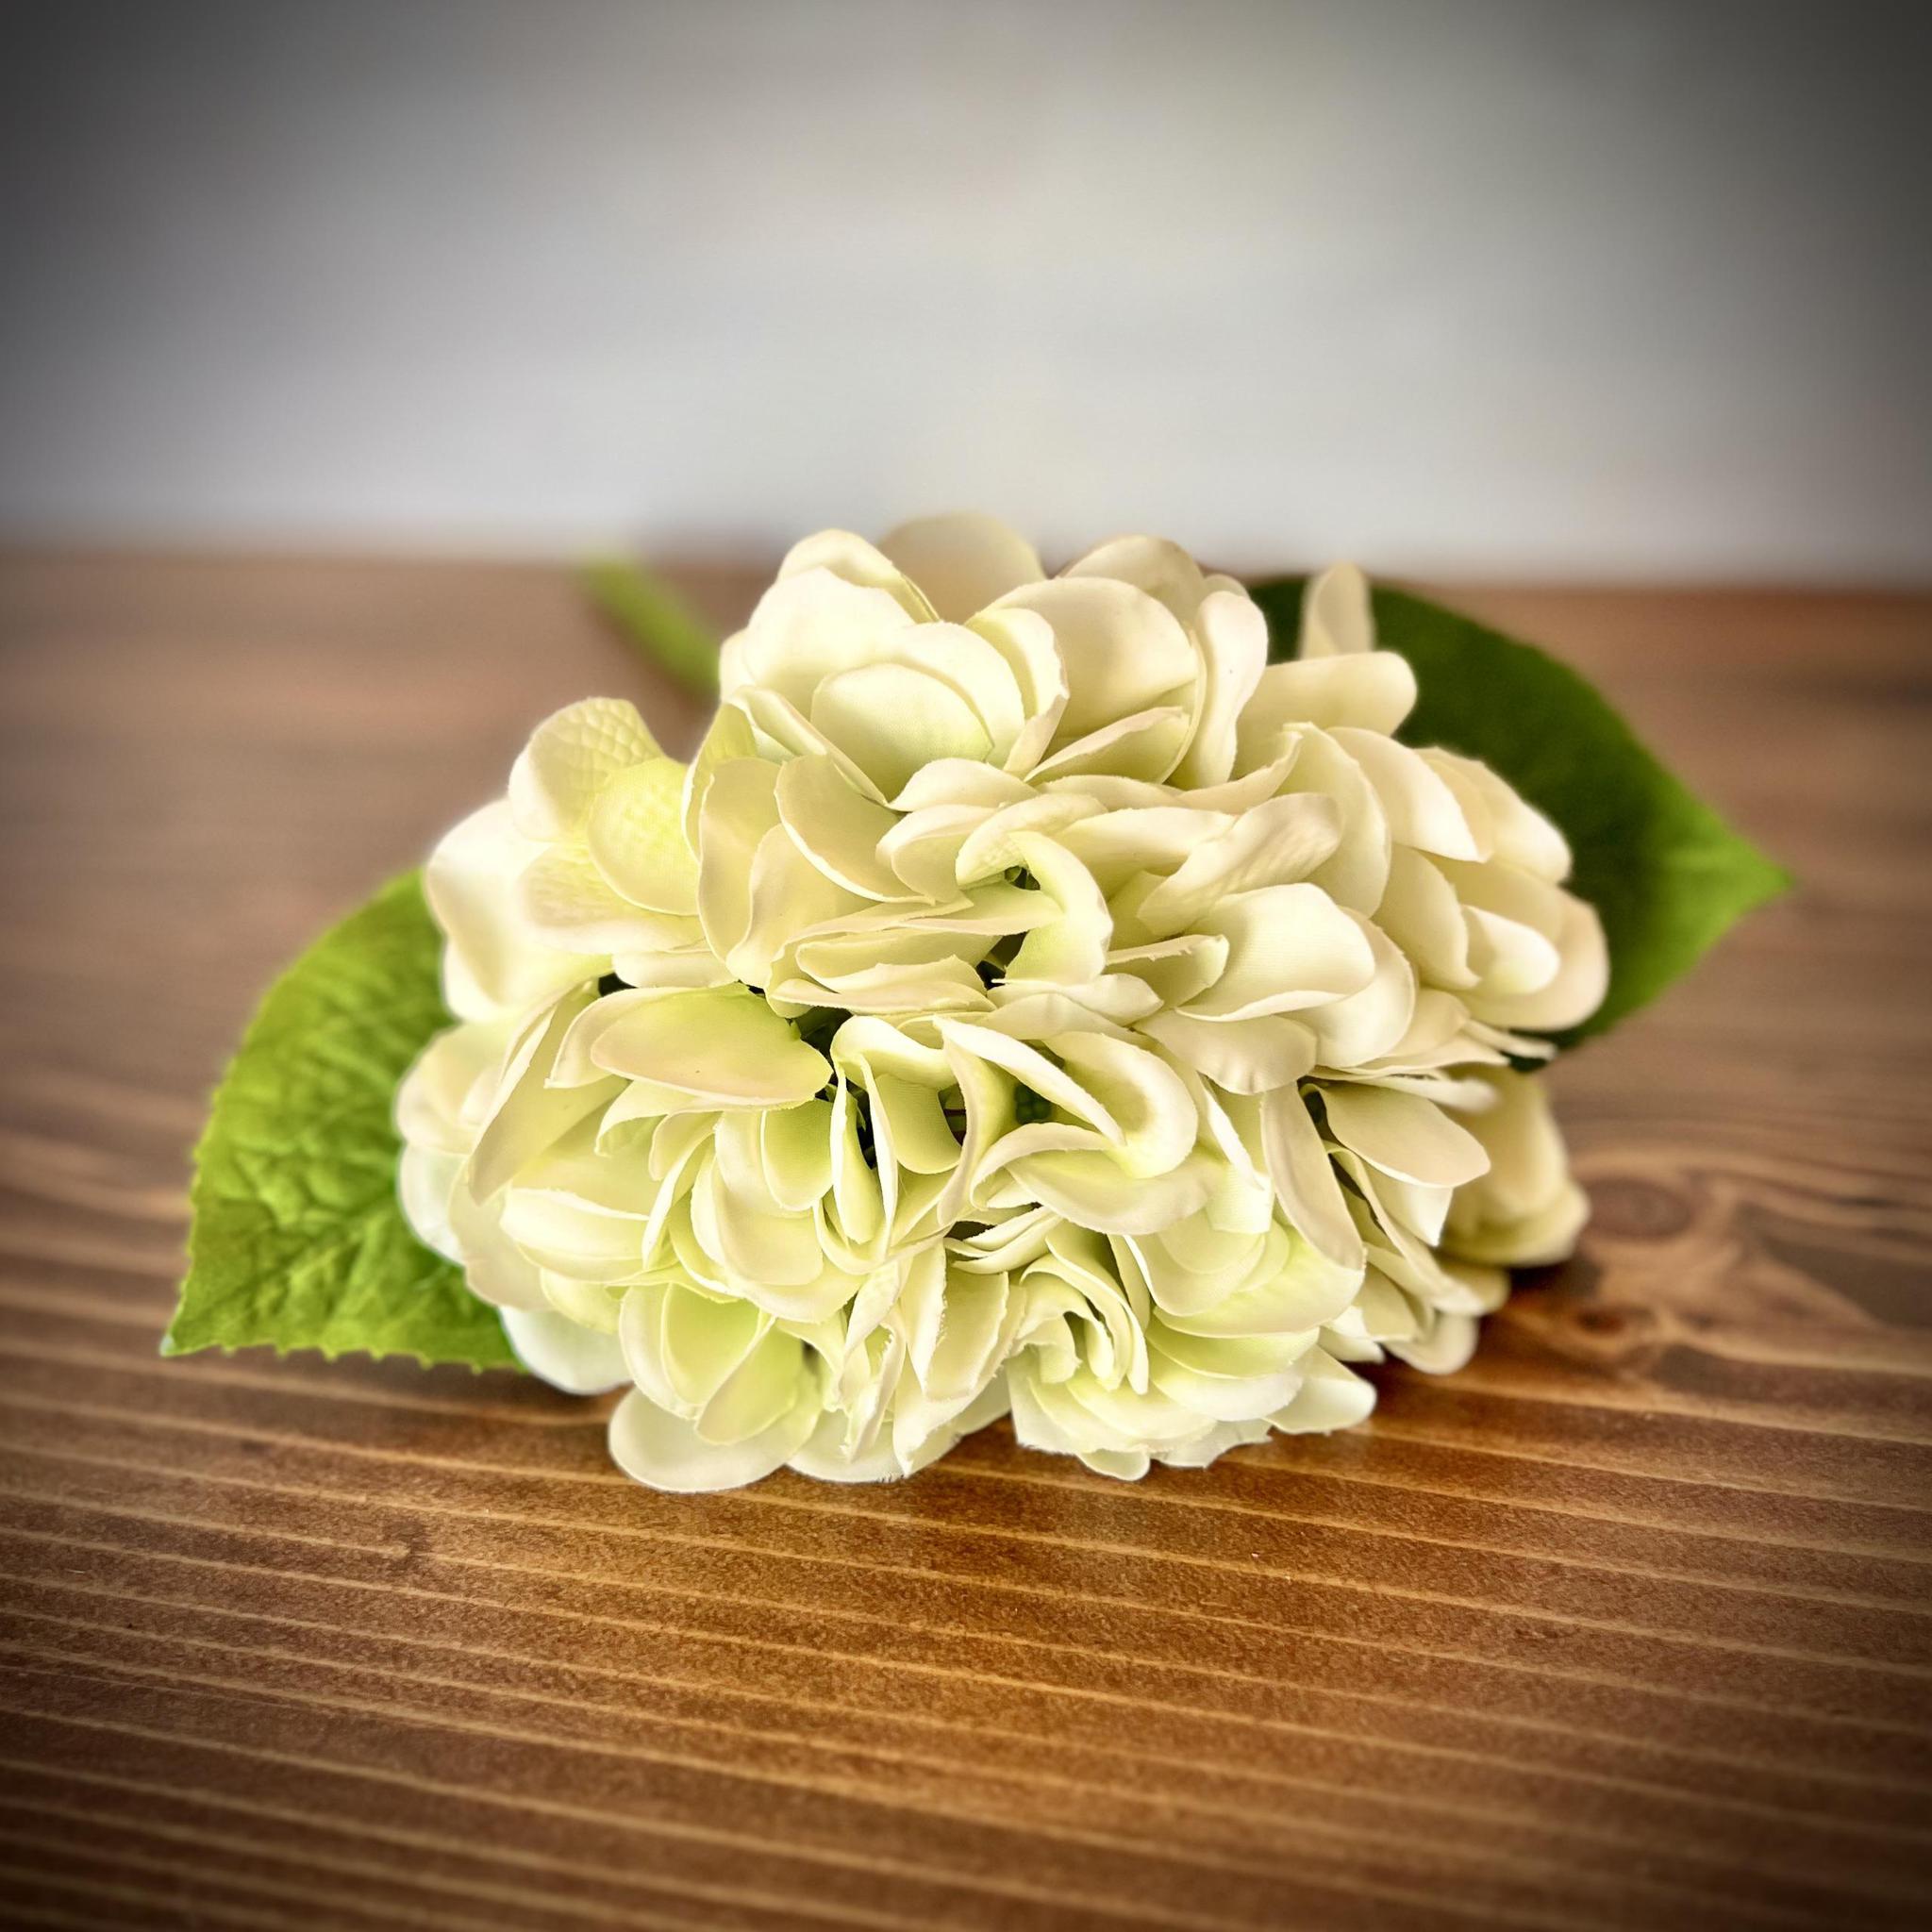 Real Touch Green Hydrangea Stem - 13"H